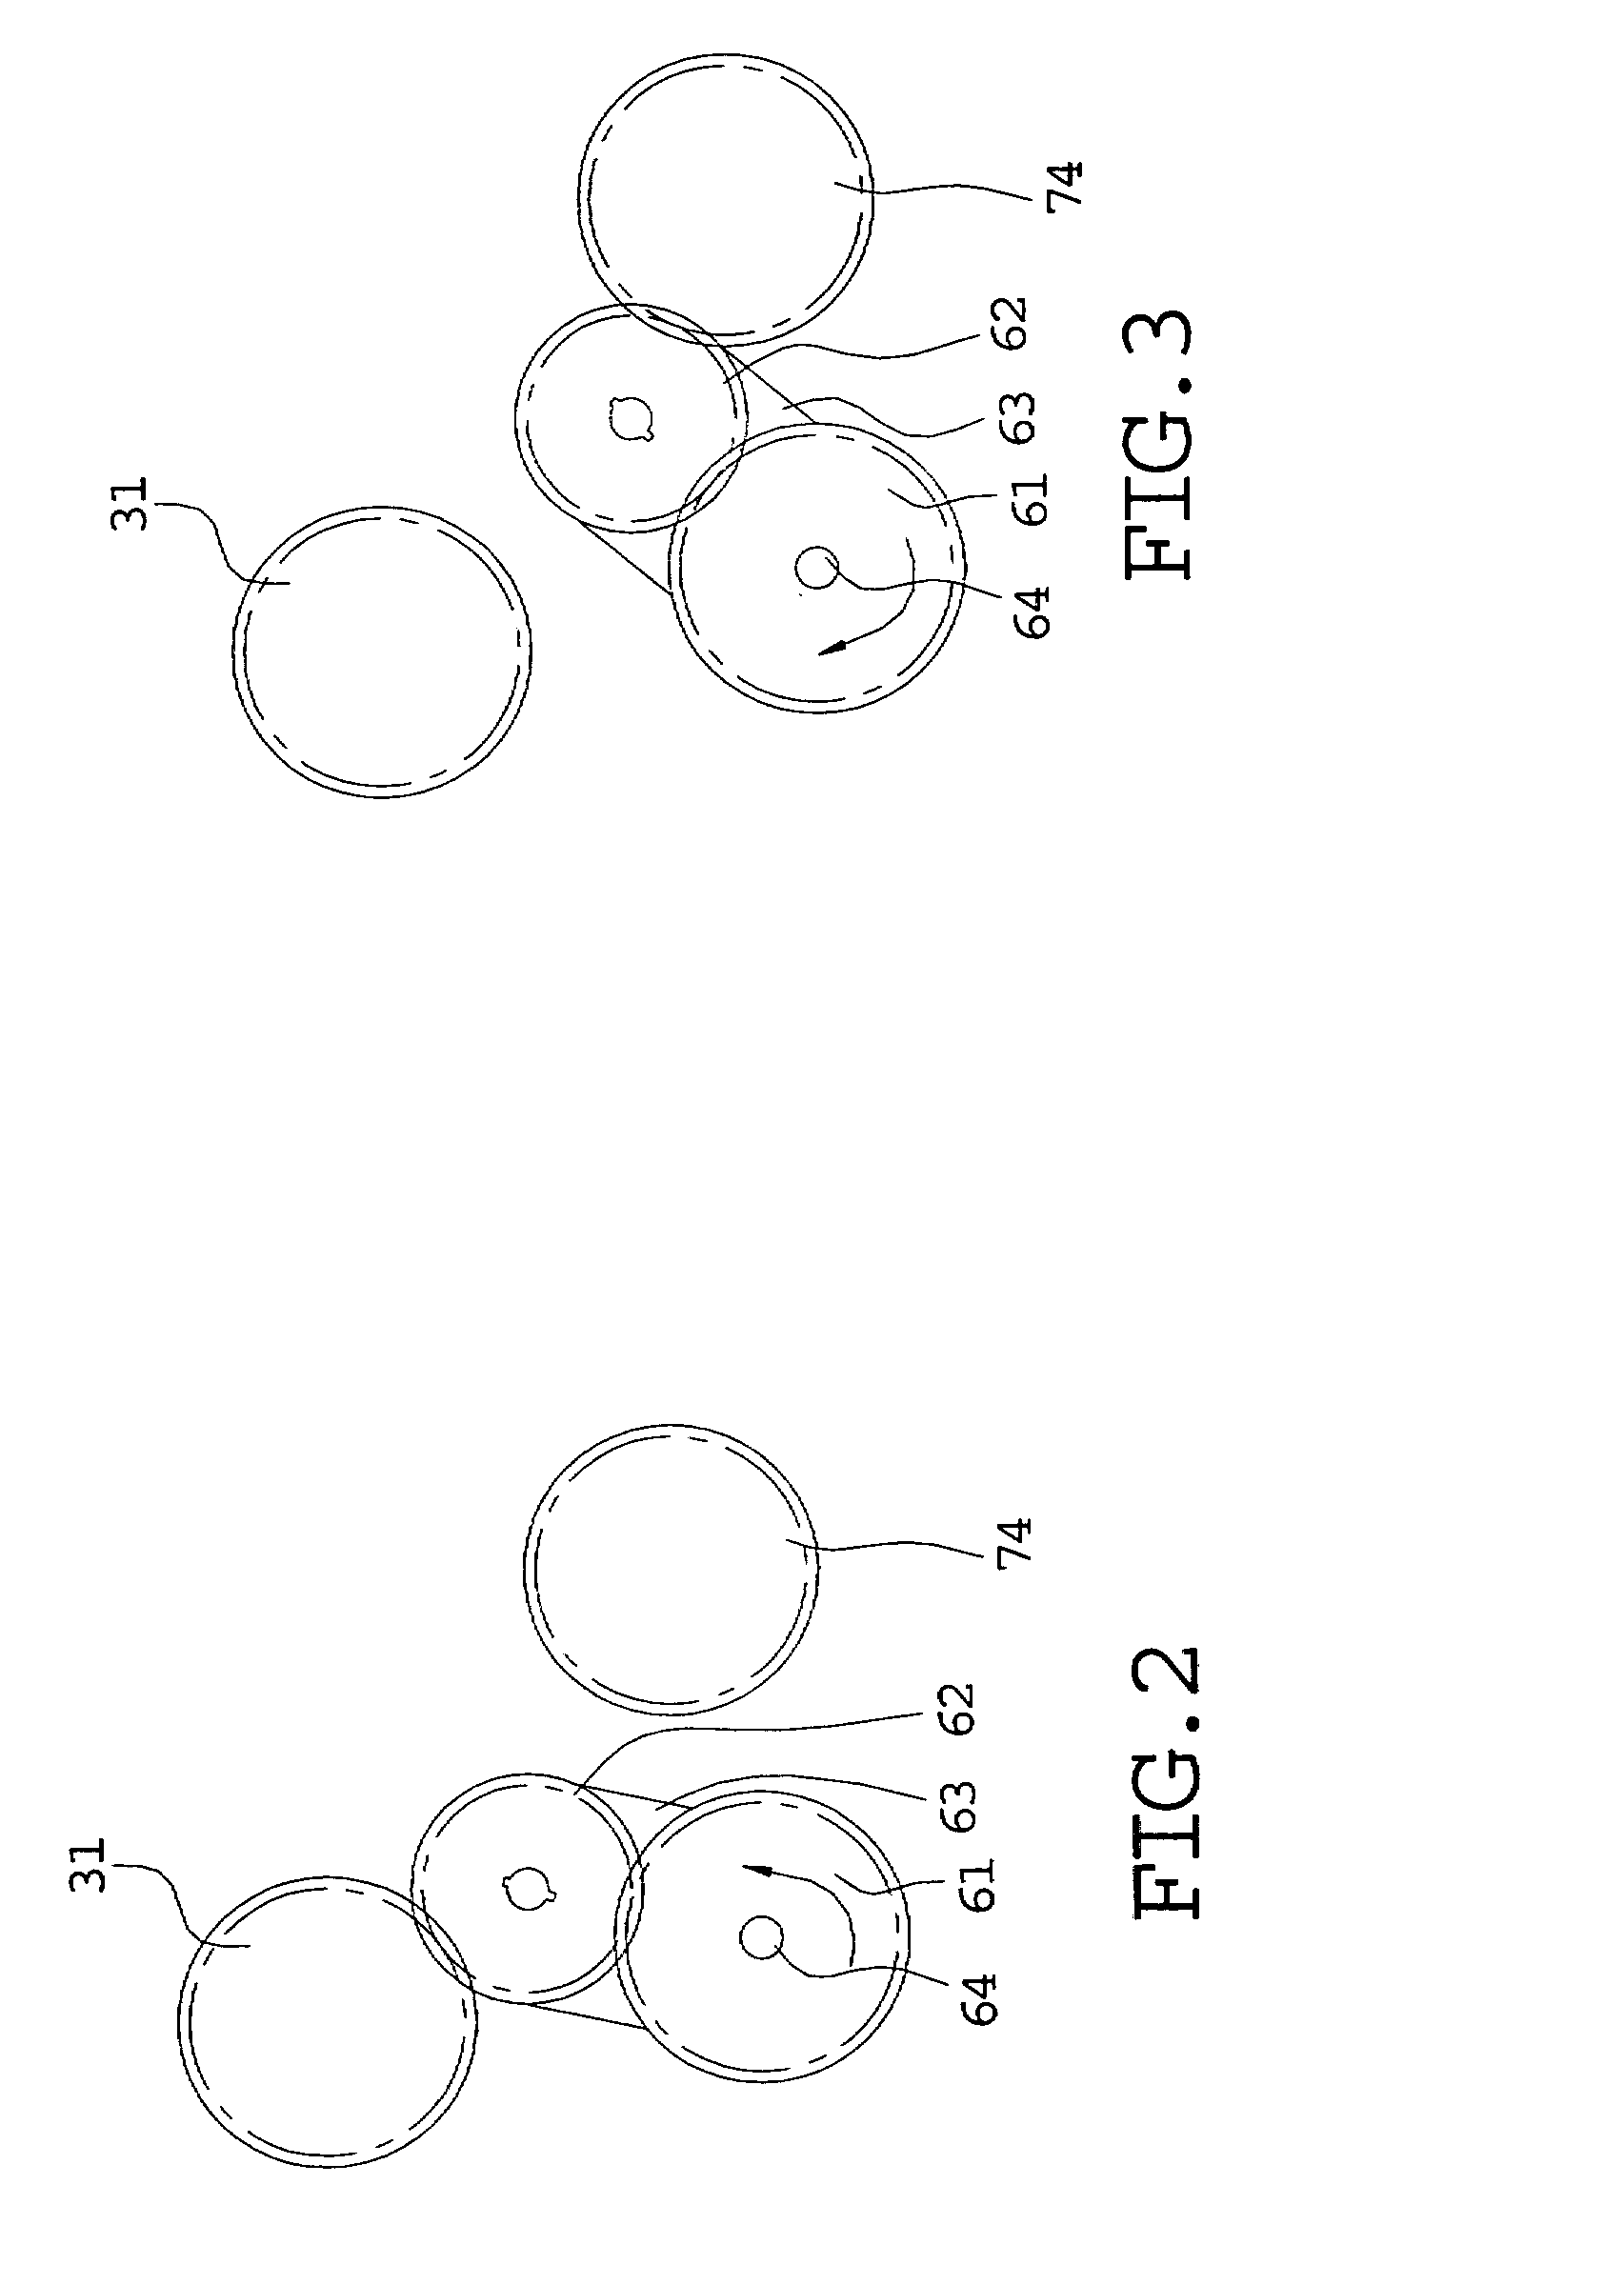 Control system for driving a motor to perform a plurality of actions